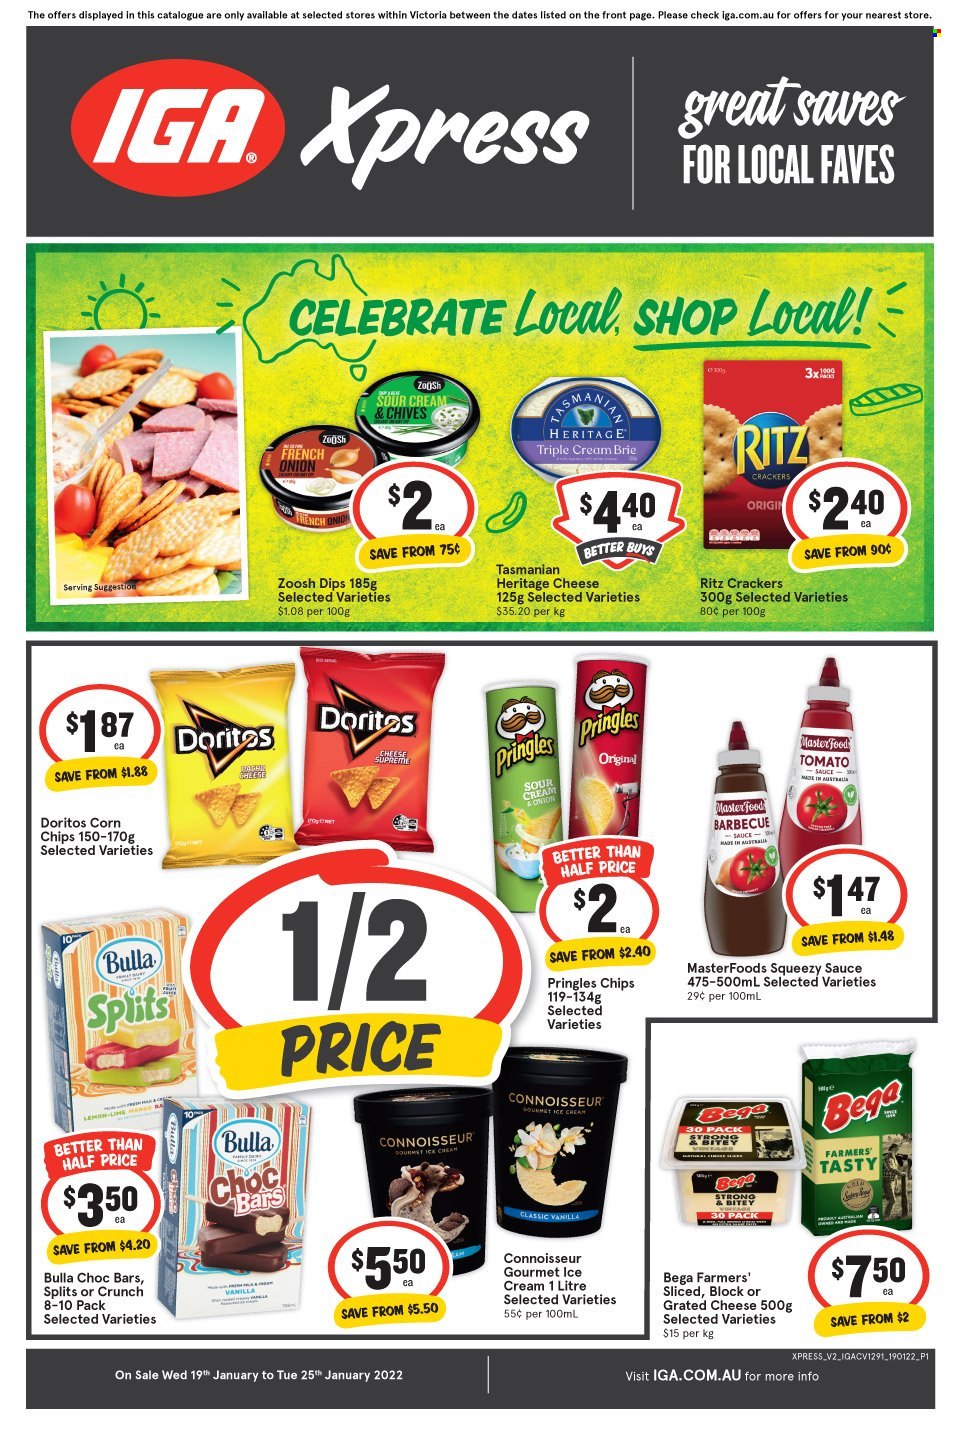 thumbnail - IGA Xpress Catalogue - 19 Jan 2022 - 25 Jan 2022 - Sales products - onion, chives, sauce, brie, Heritage cheese, grated cheese, Tasmanian Heritage, ice cream, crackers, Victoria Sponge, RITZ, Doritos, Pringles, chips, corn chips, ZoOsh. Page 1.